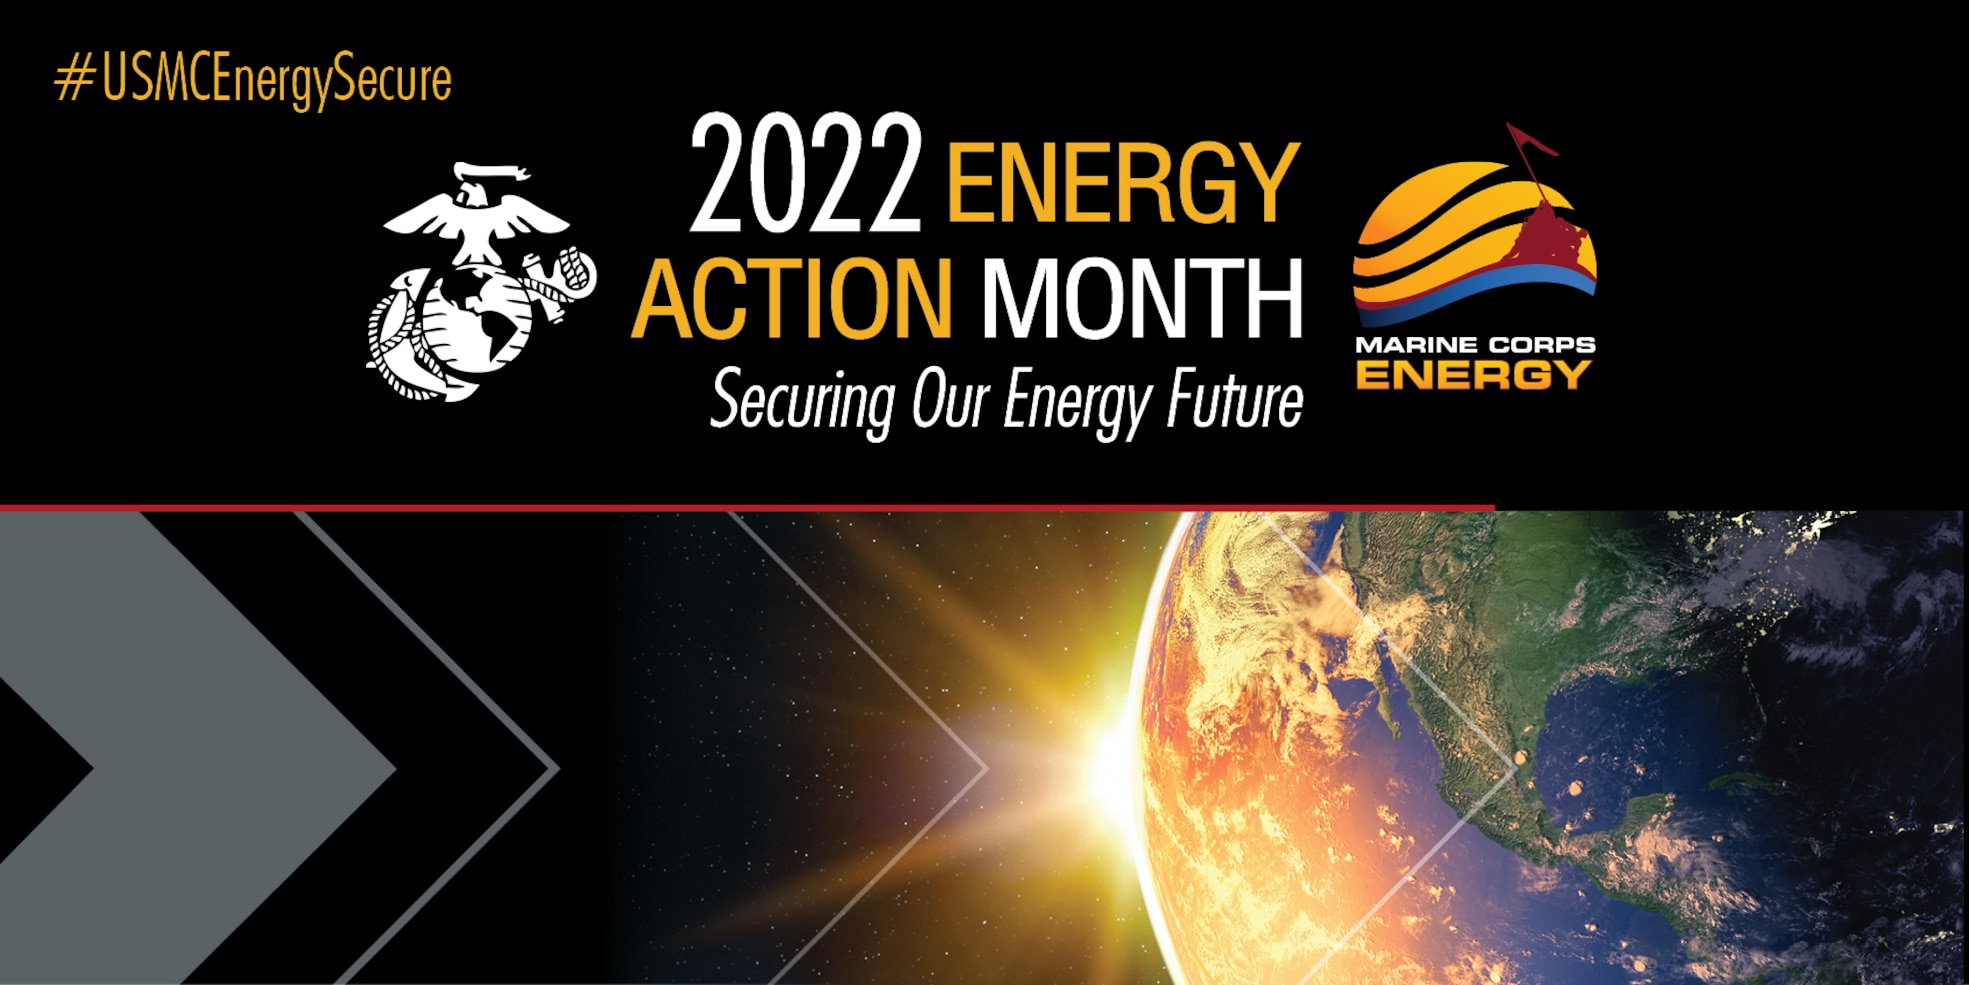 Graphic for the 2022 Energy Action Month with a picture of the Earth from outer space, the sun just peeking out from the side.